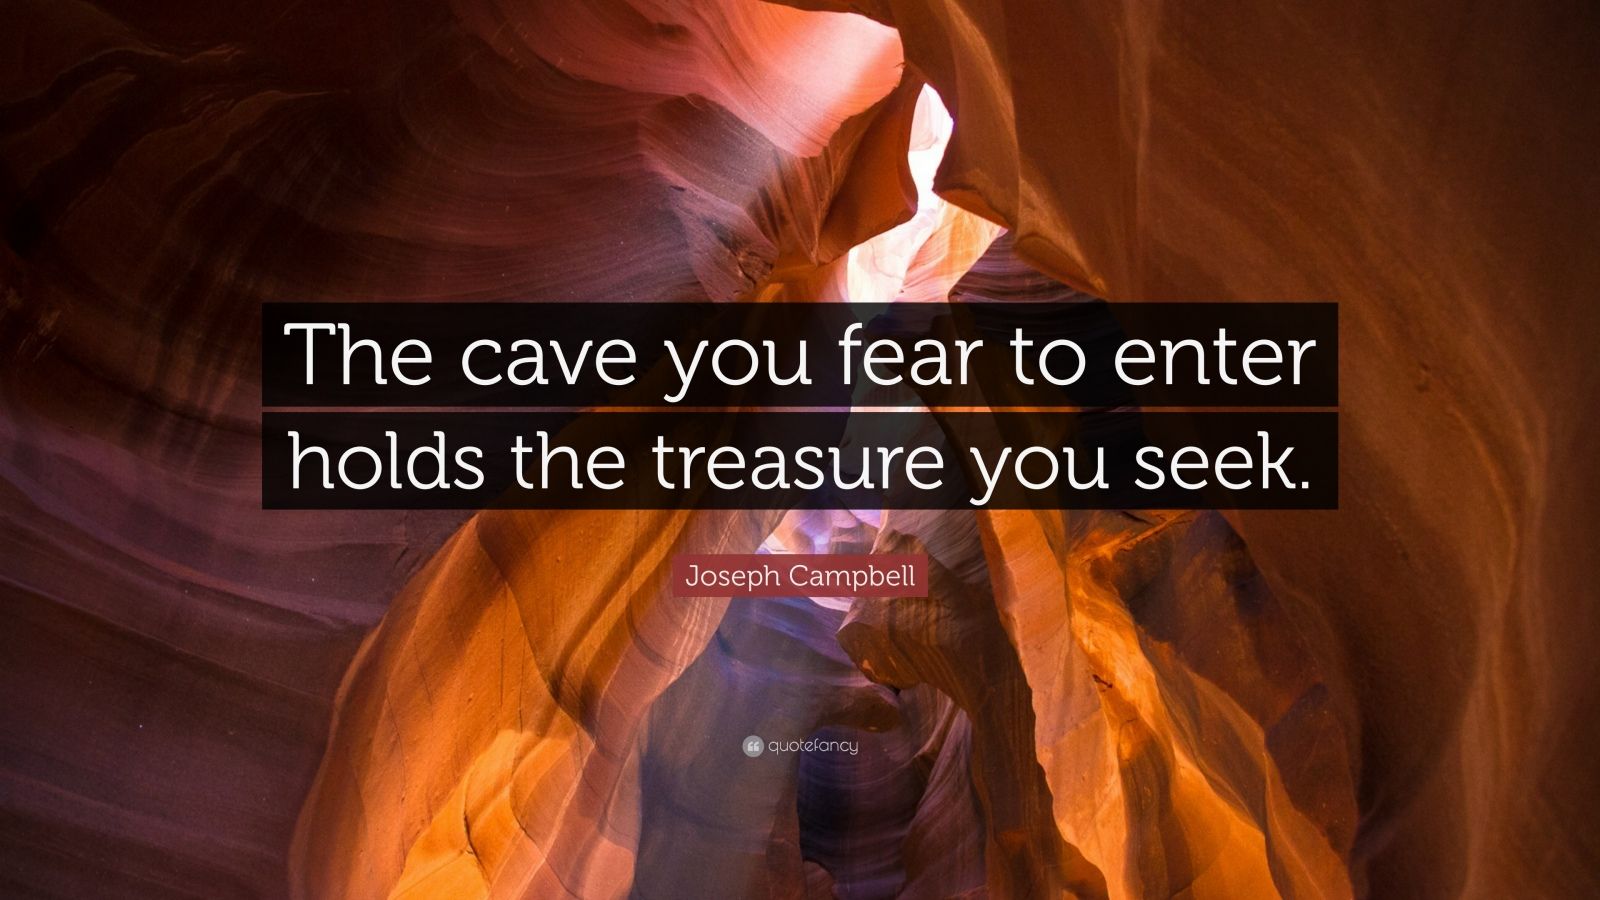 Joseph Campbell Quote “the Cave You Fear To Enter Holds The Treasure You Seek” 17 Wallpapers 3049